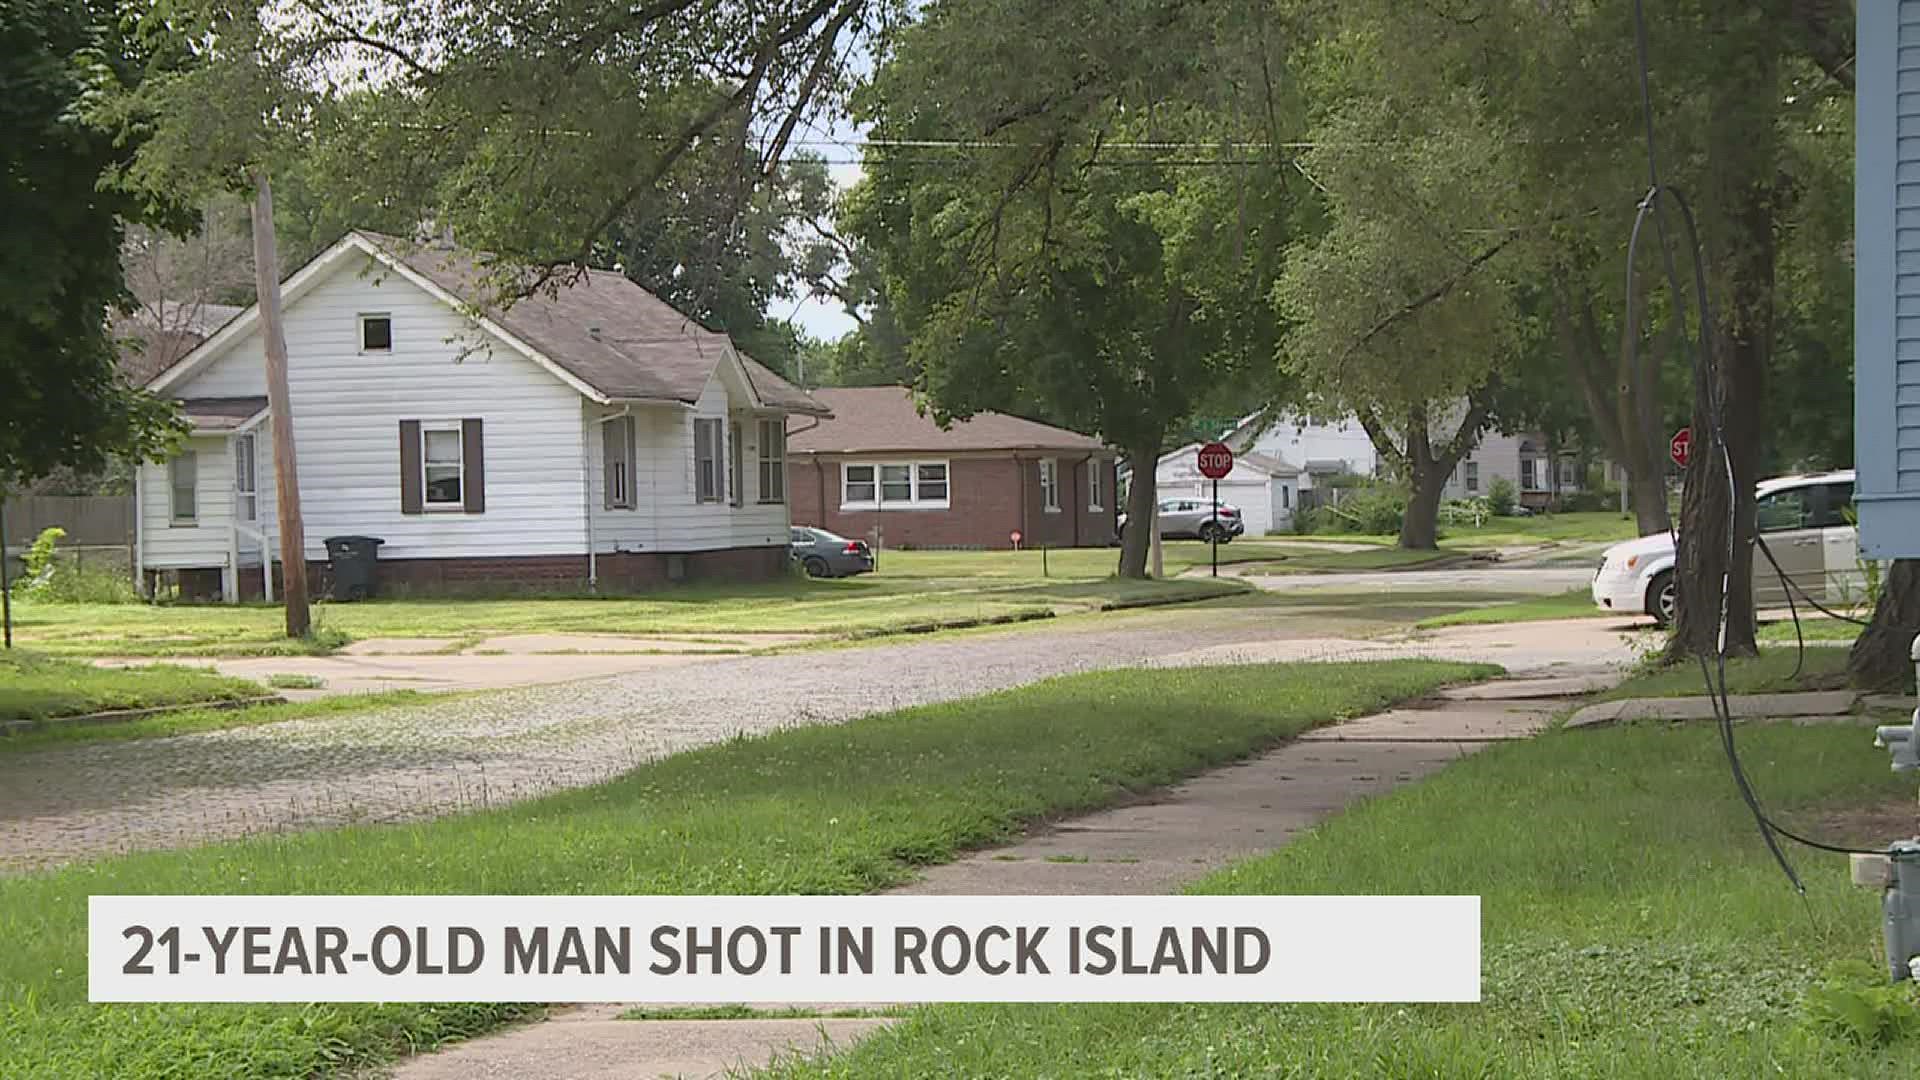 Police said they responded to the 1400 block of 8th Street in the Douglas Park neighborhood for the man injured.